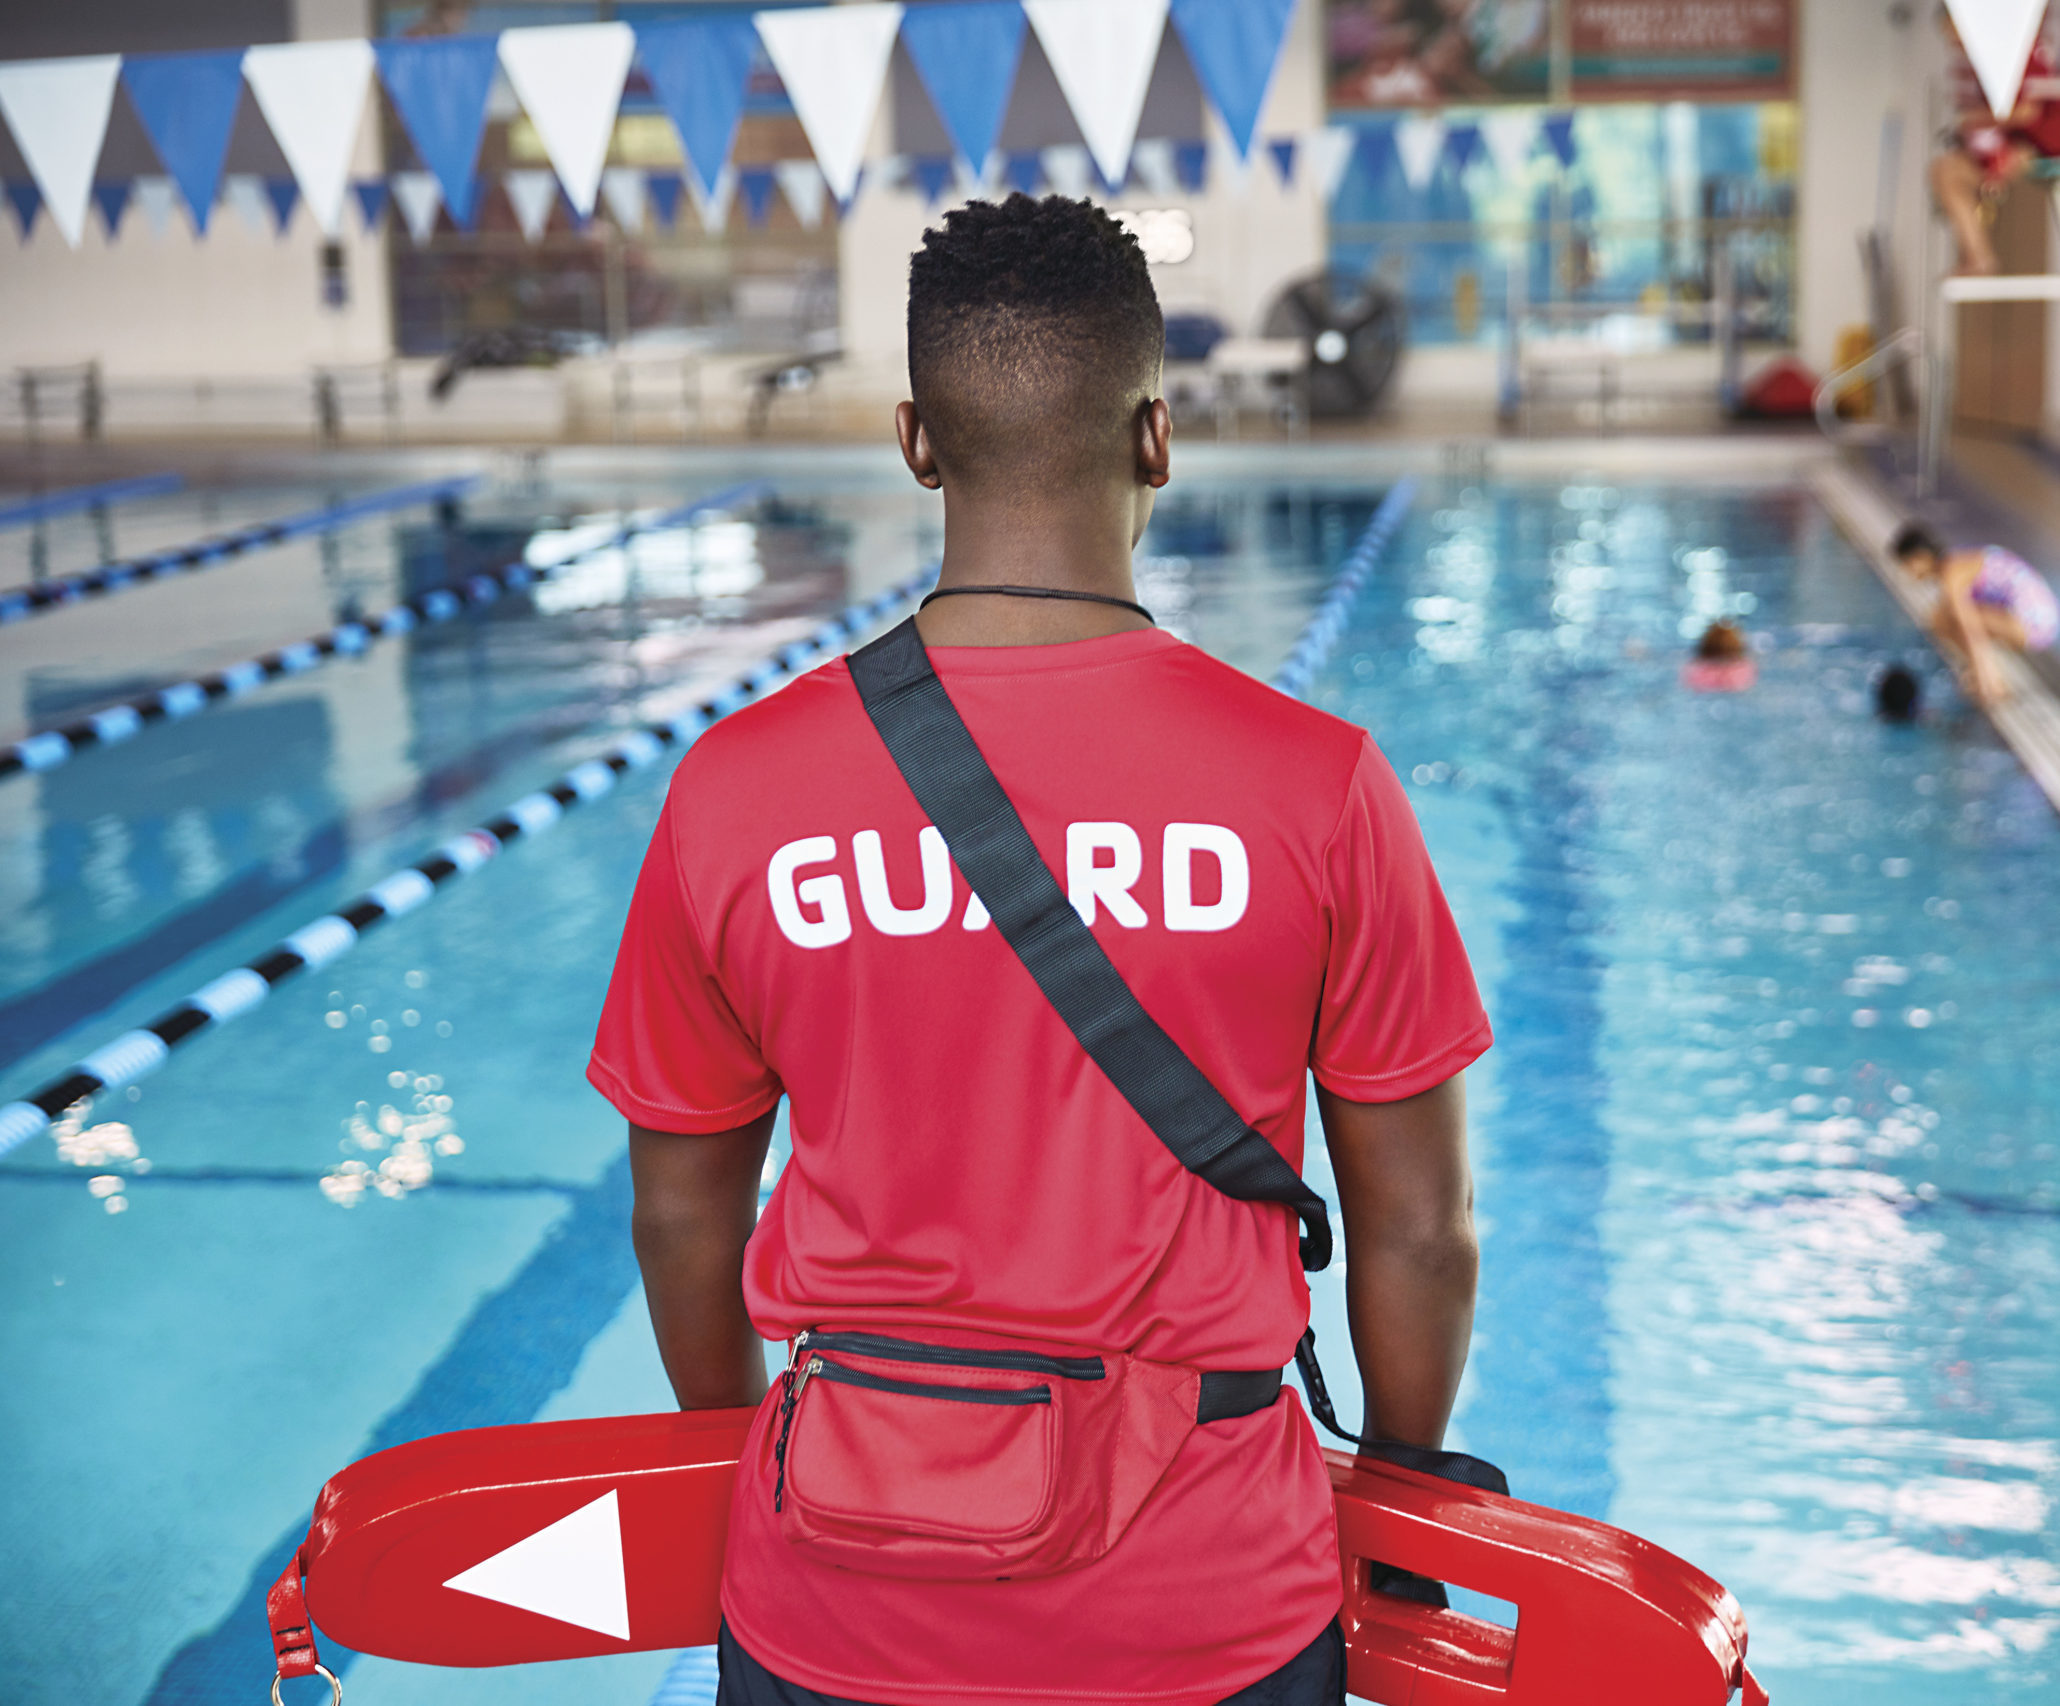 Image of lifeguard actively watching over pool